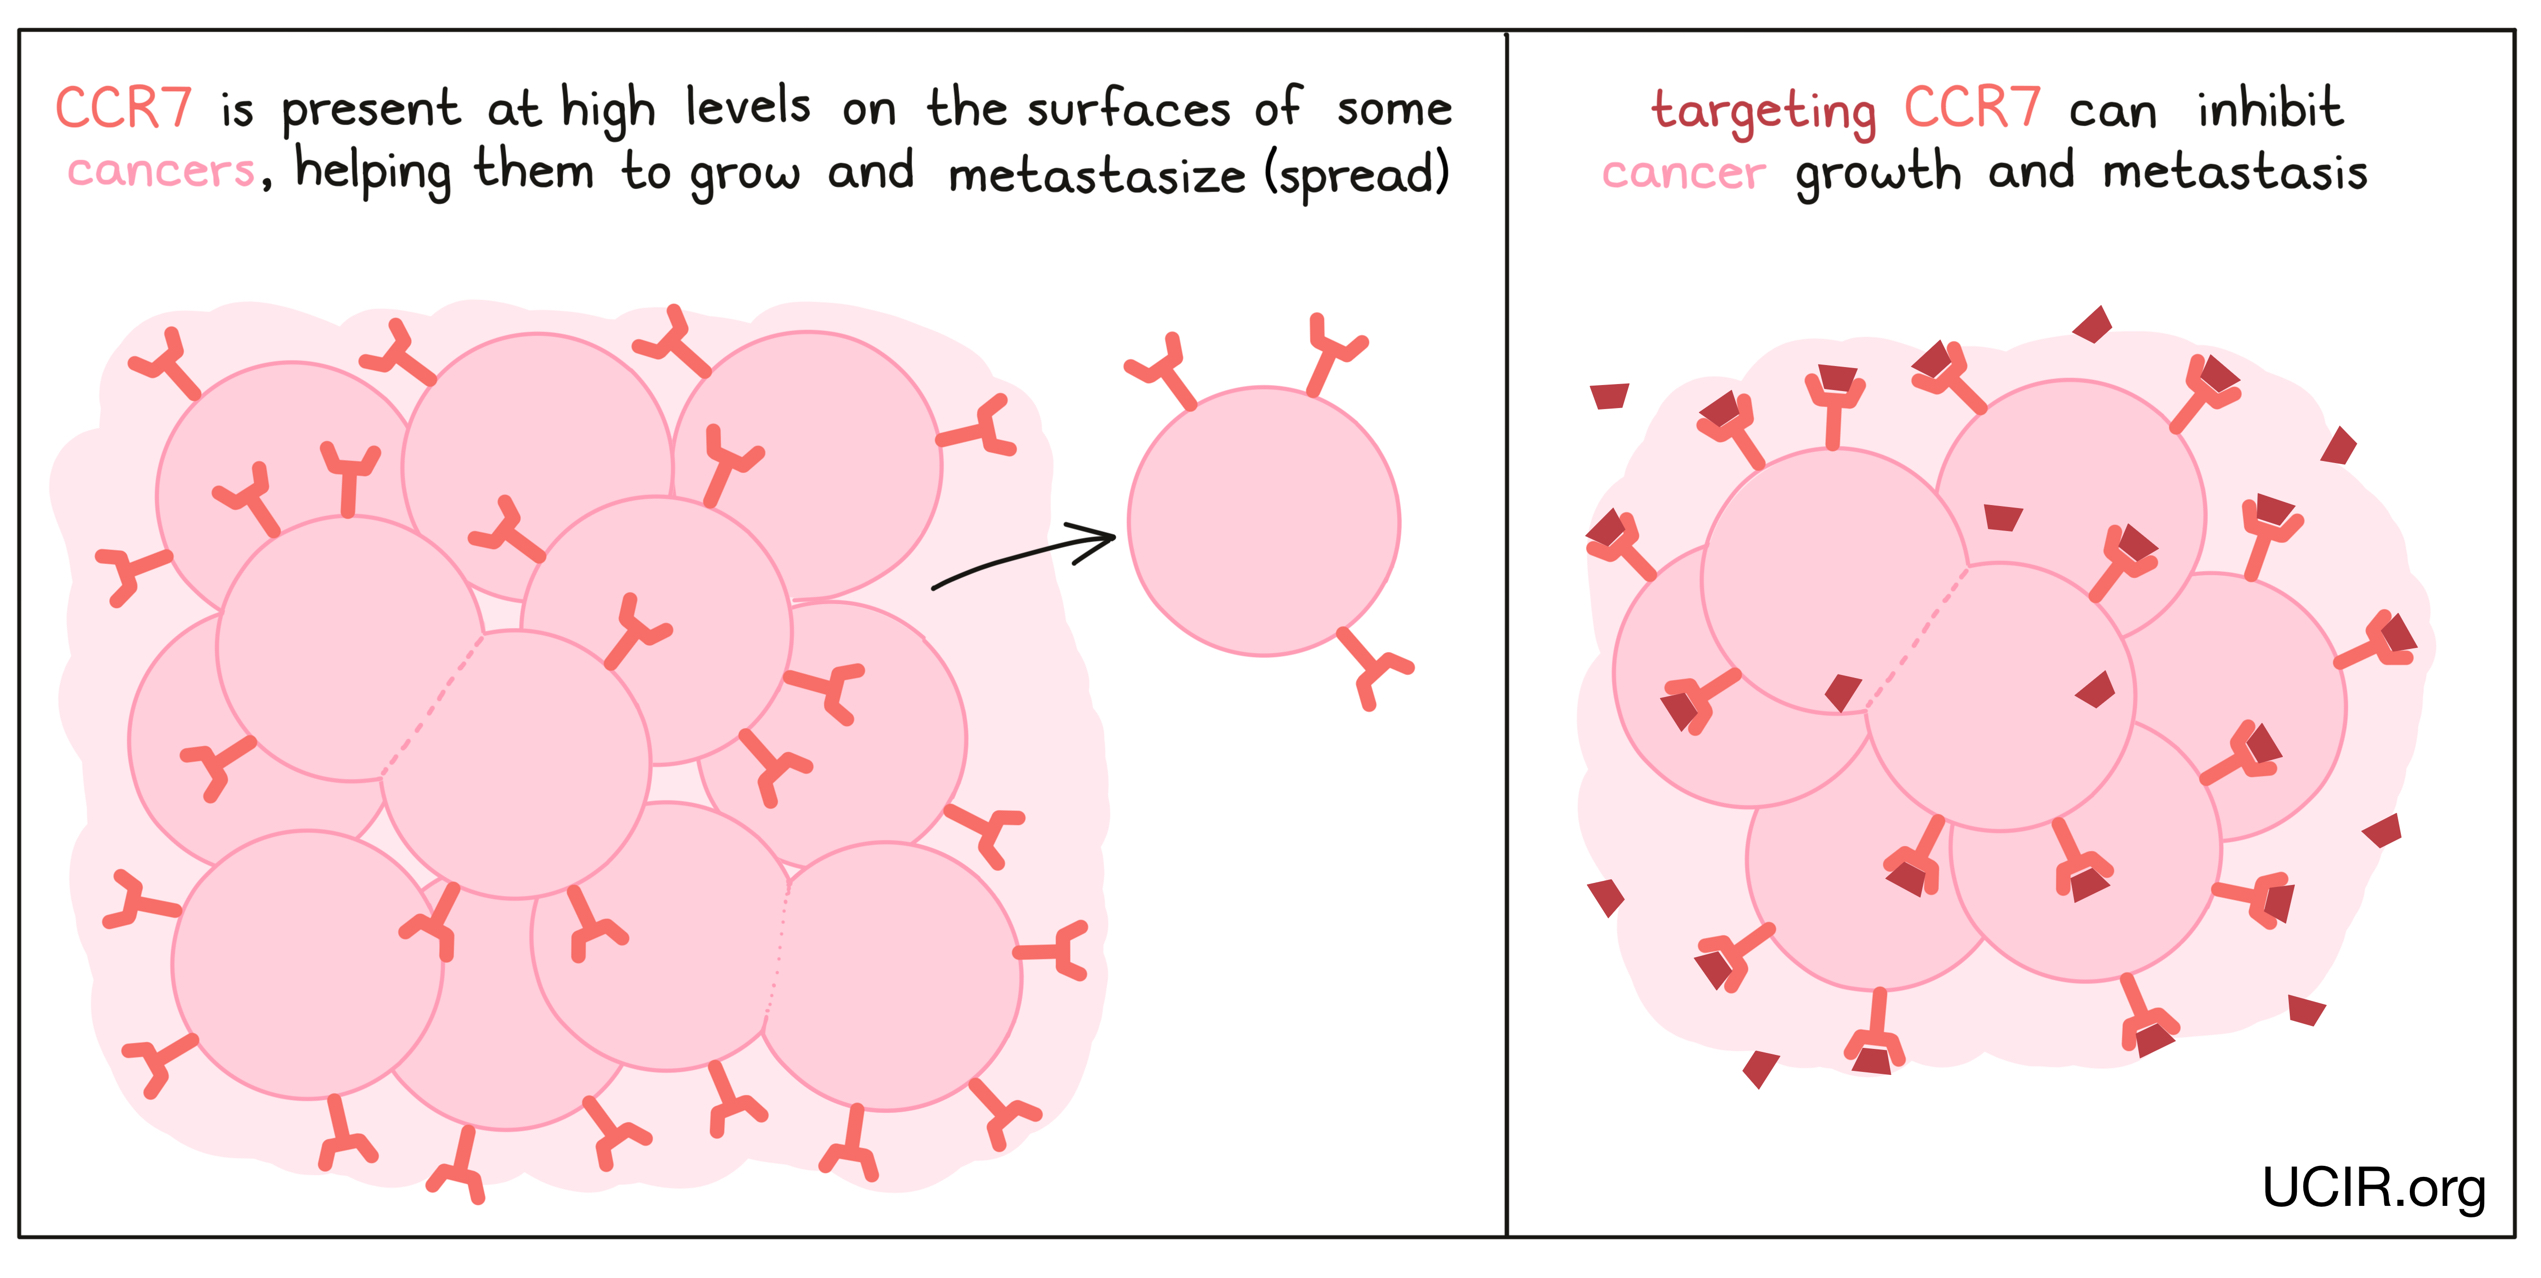 Illustration showing what targeting CCR7 does